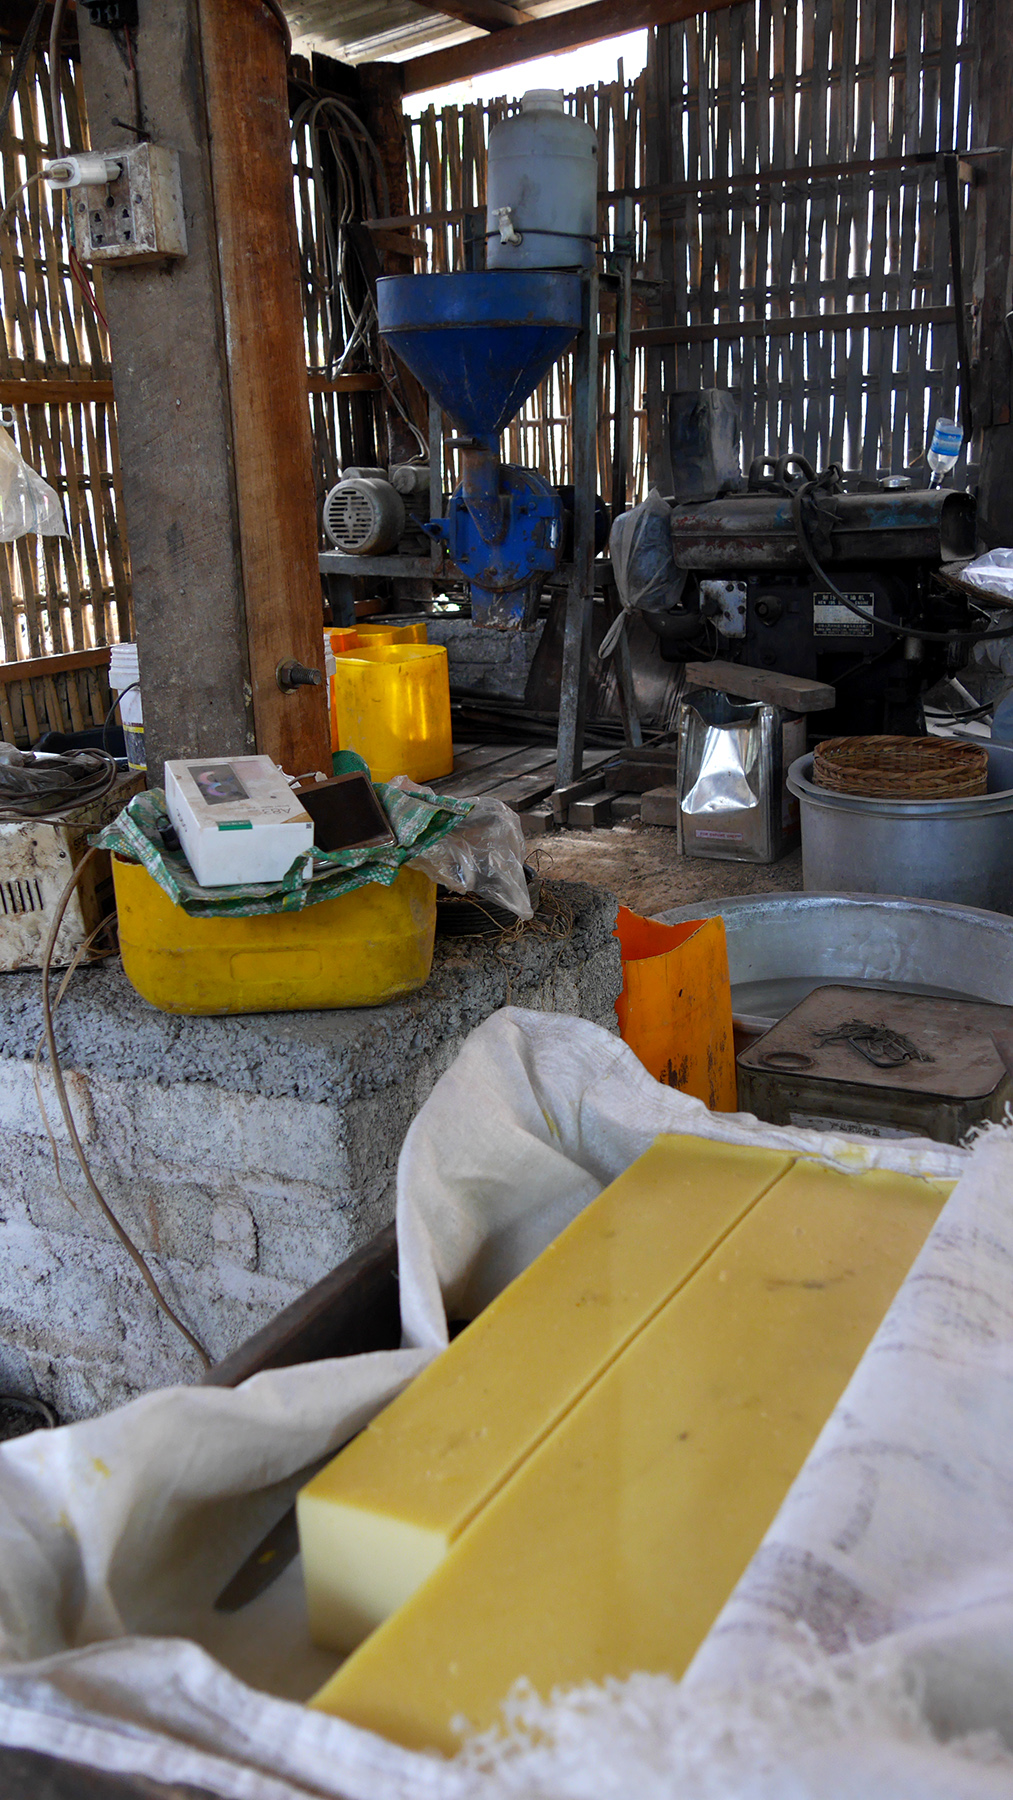 One of the chickpea tofu factories. In the front there's some ready-made tofu